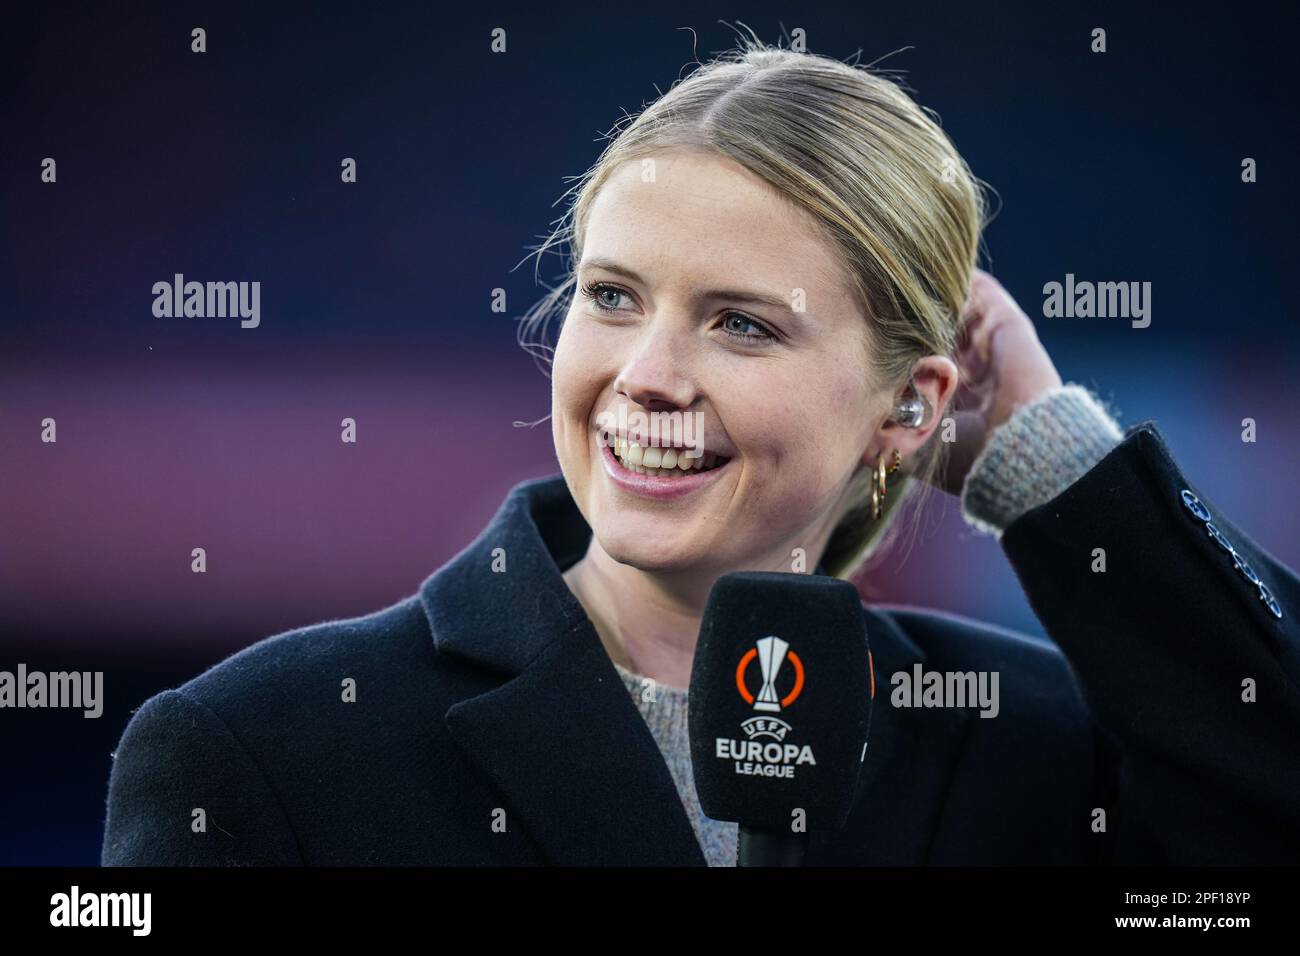 Rotterdam - Noa Vahle during the match between Feyenoord v Shakhtar Donetsk at Stadion Feijenoord De Kuip on 16 March 2023 in Rotterdam, the Netherlands. (Box to Box Pictures/Yannick Verhoeven) Stock Photo